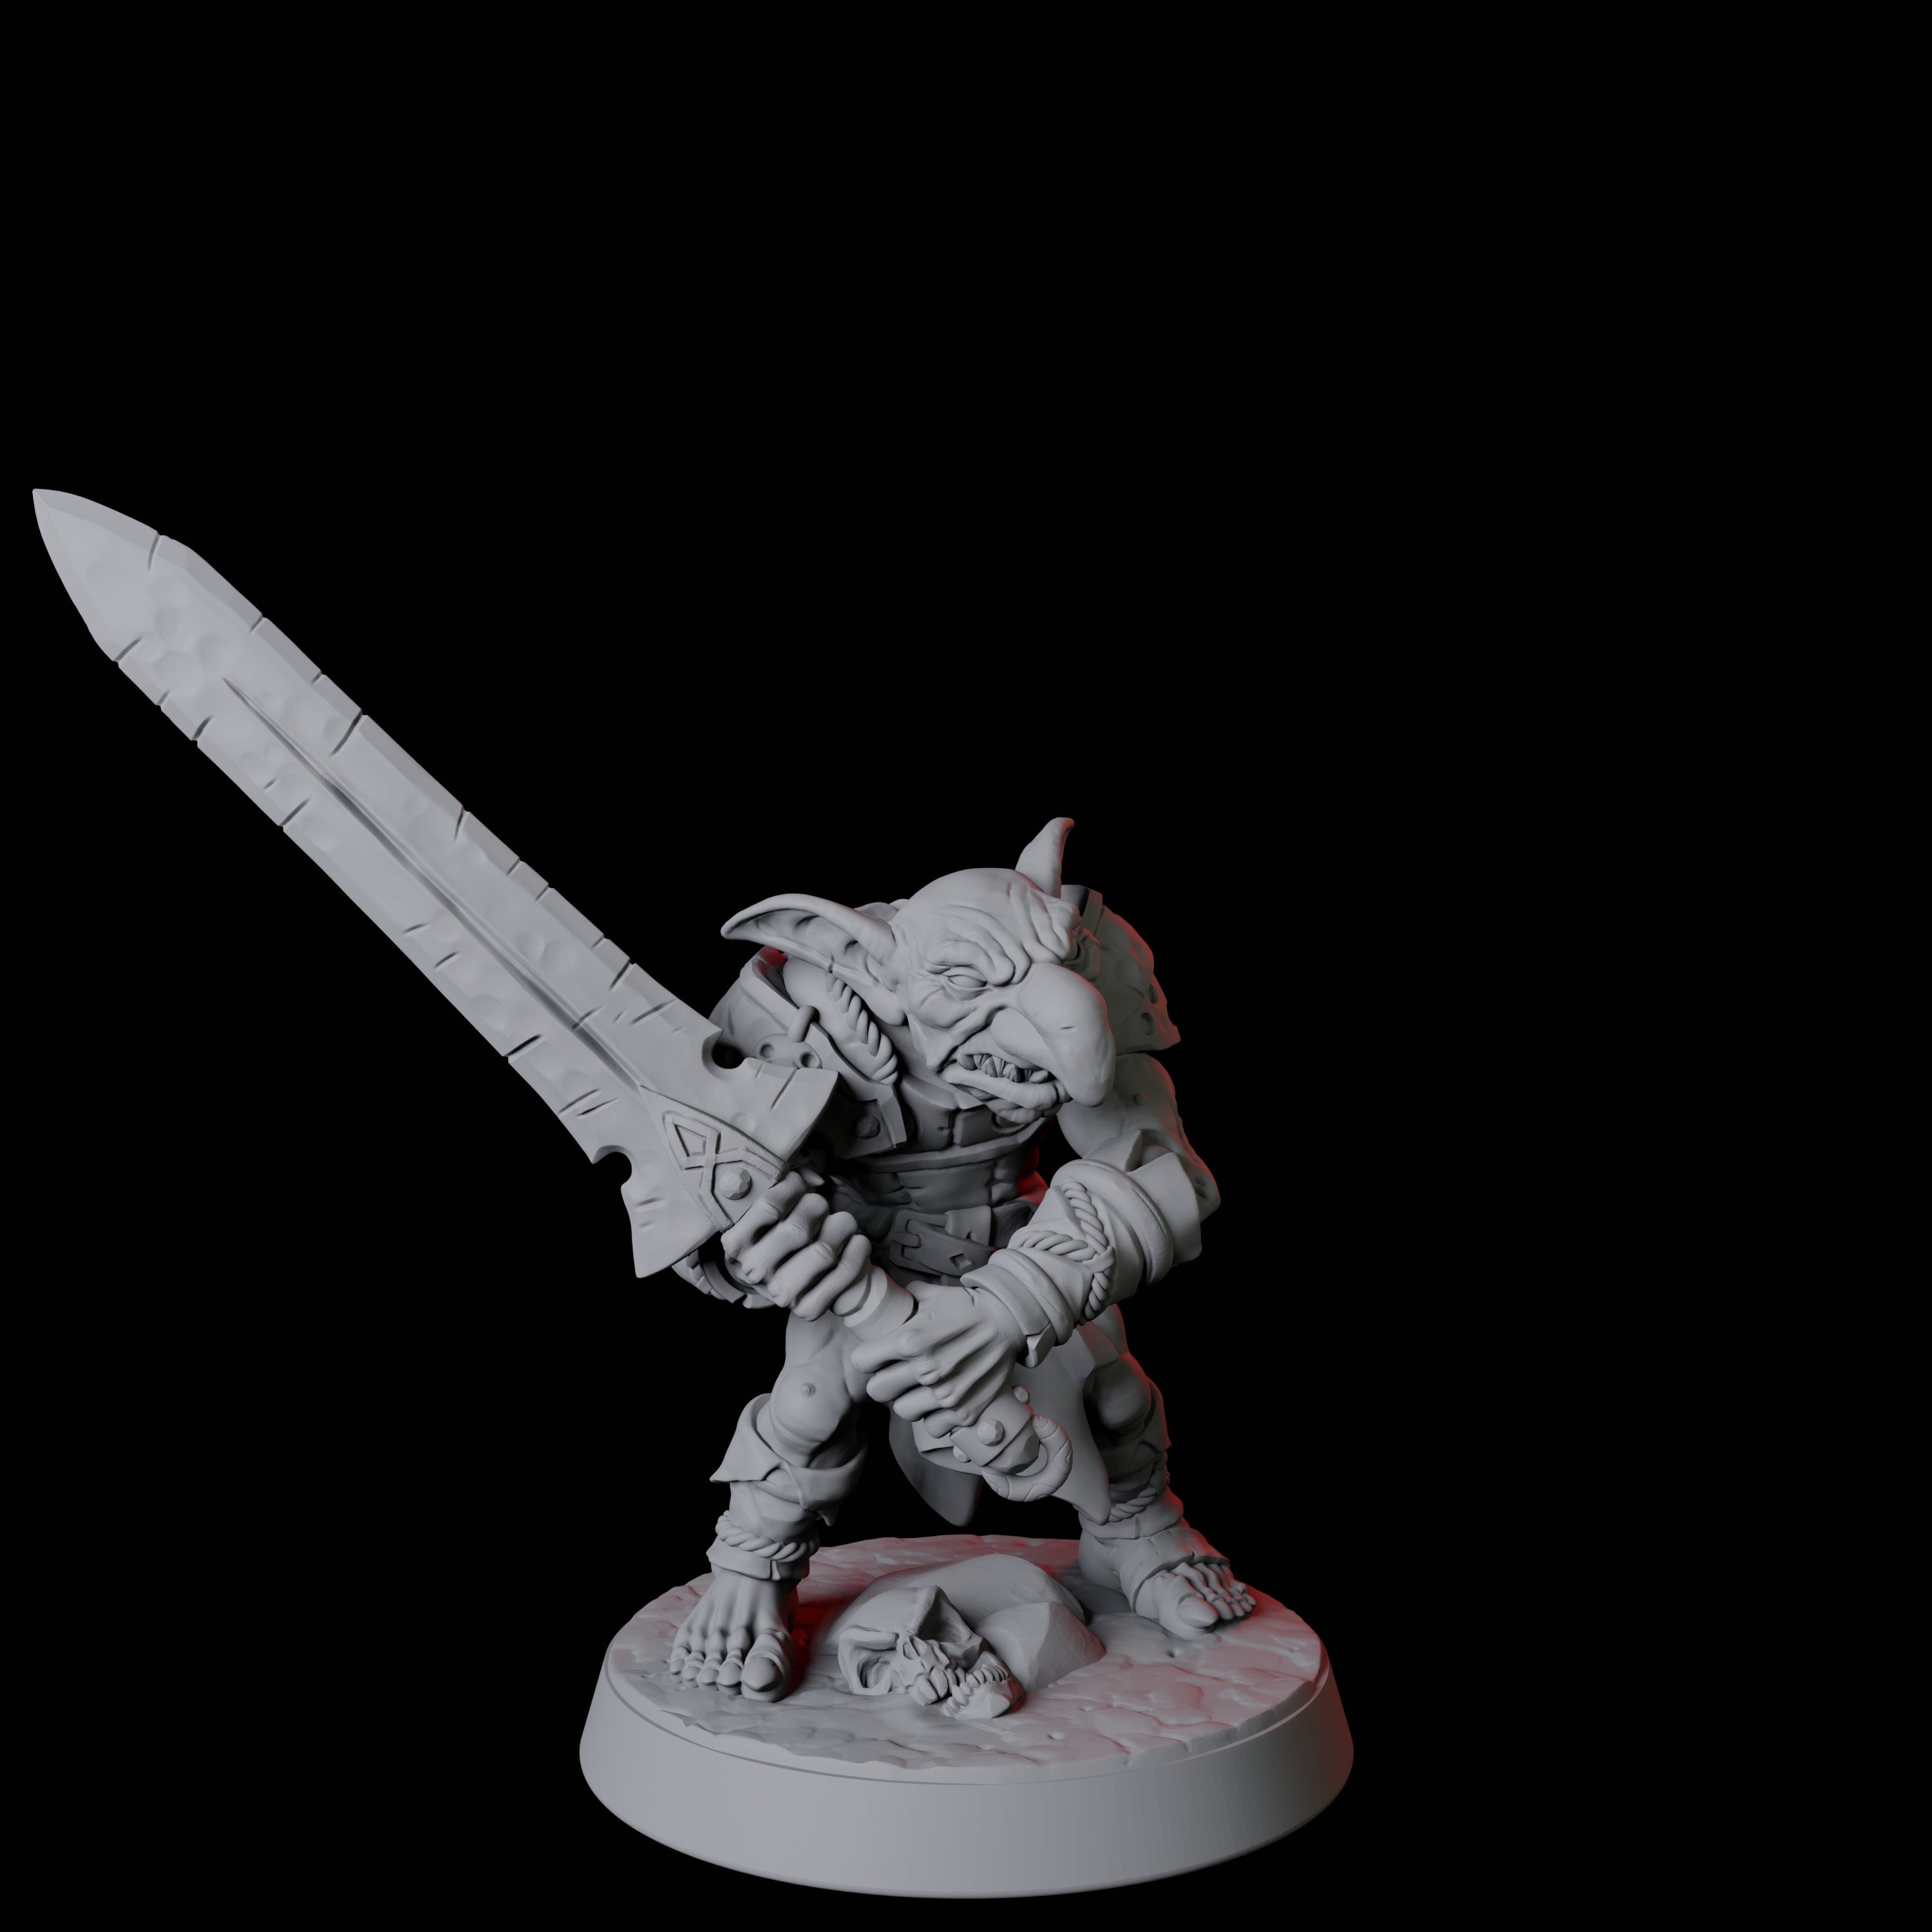 Six Snivelling Goblins Miniature for Dungeons and Dragons, Pathfinder or other TTRPGs